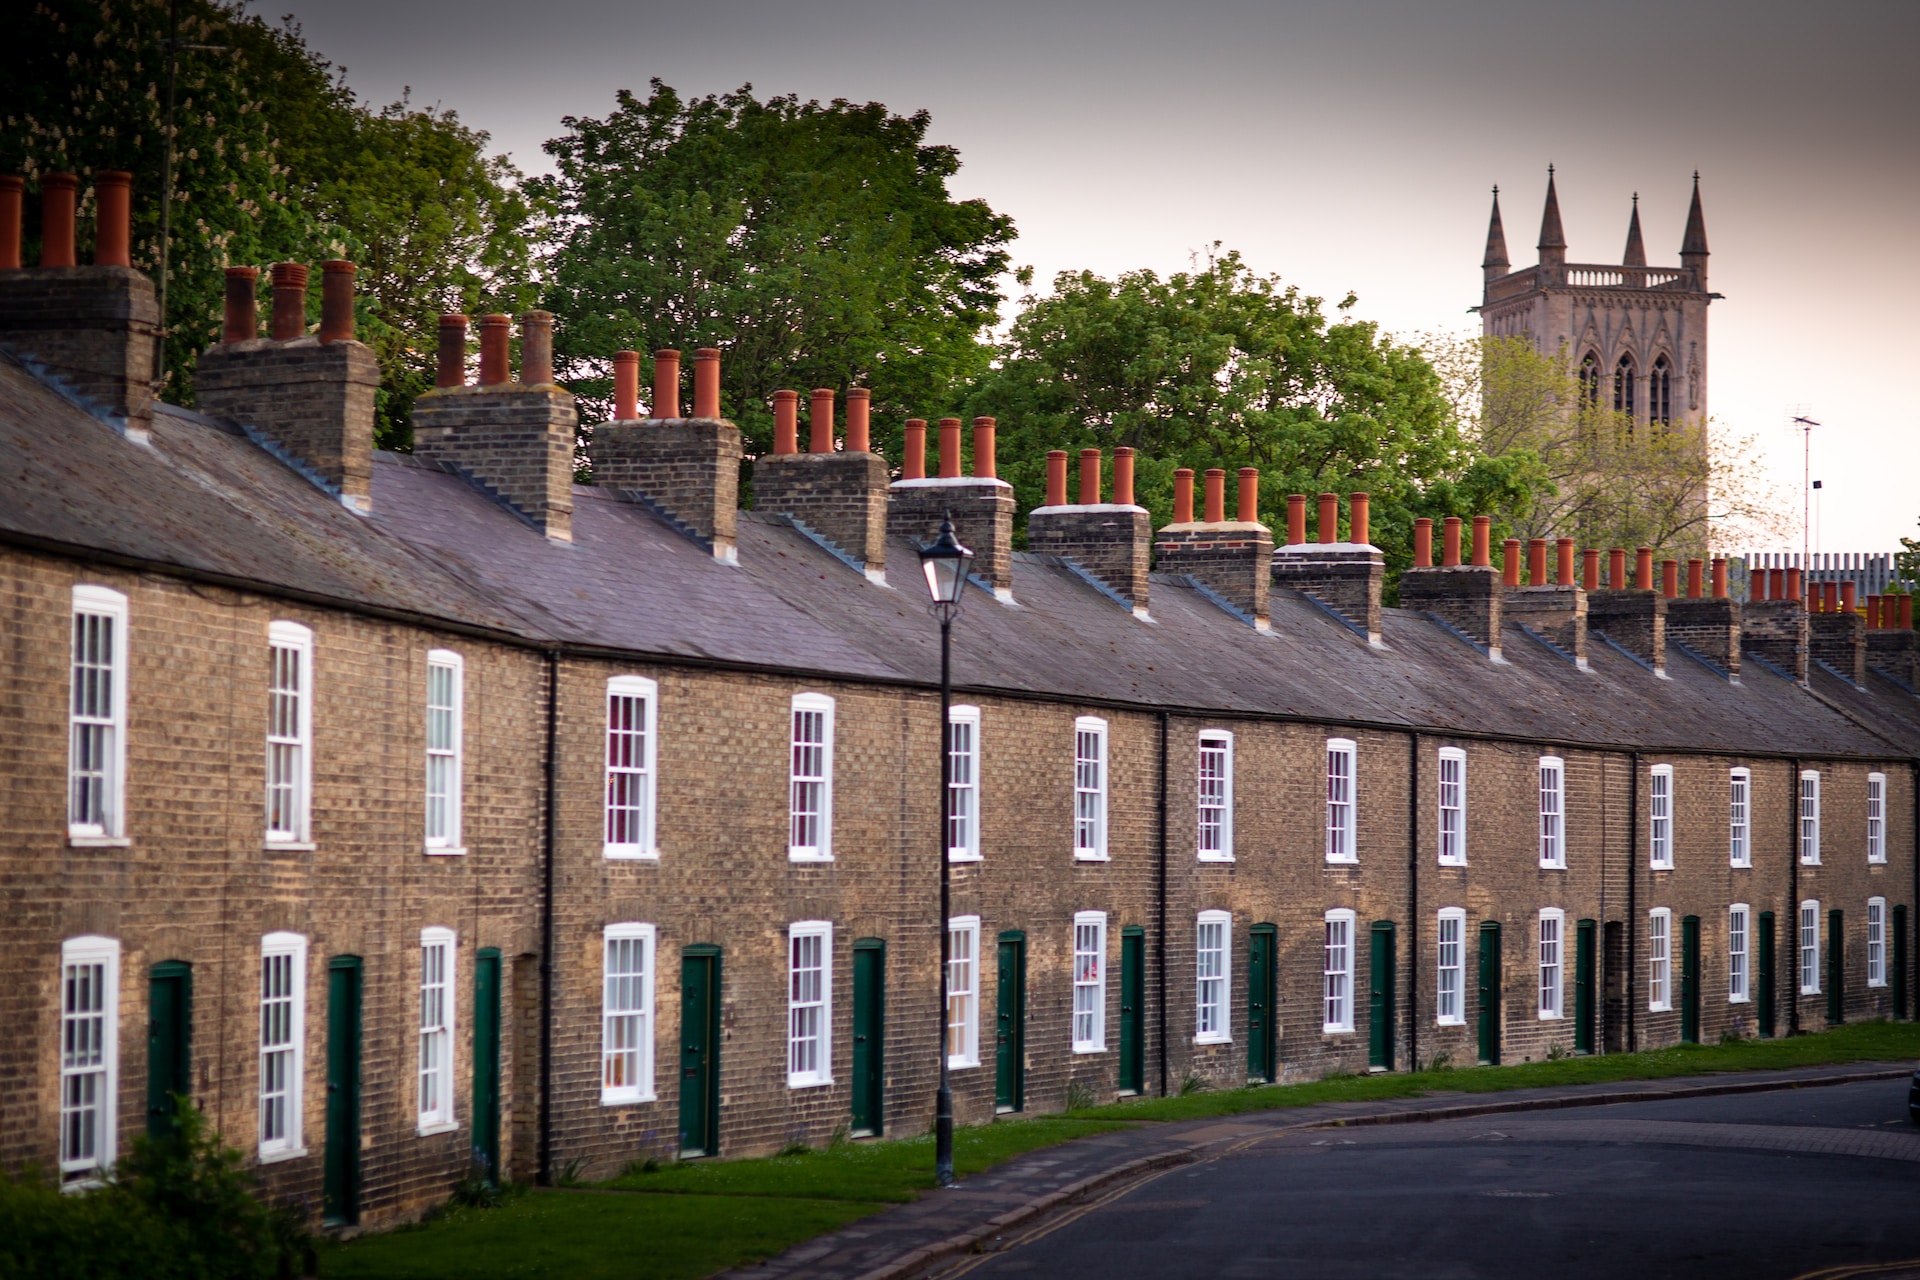 A row of houses with a church in the distance